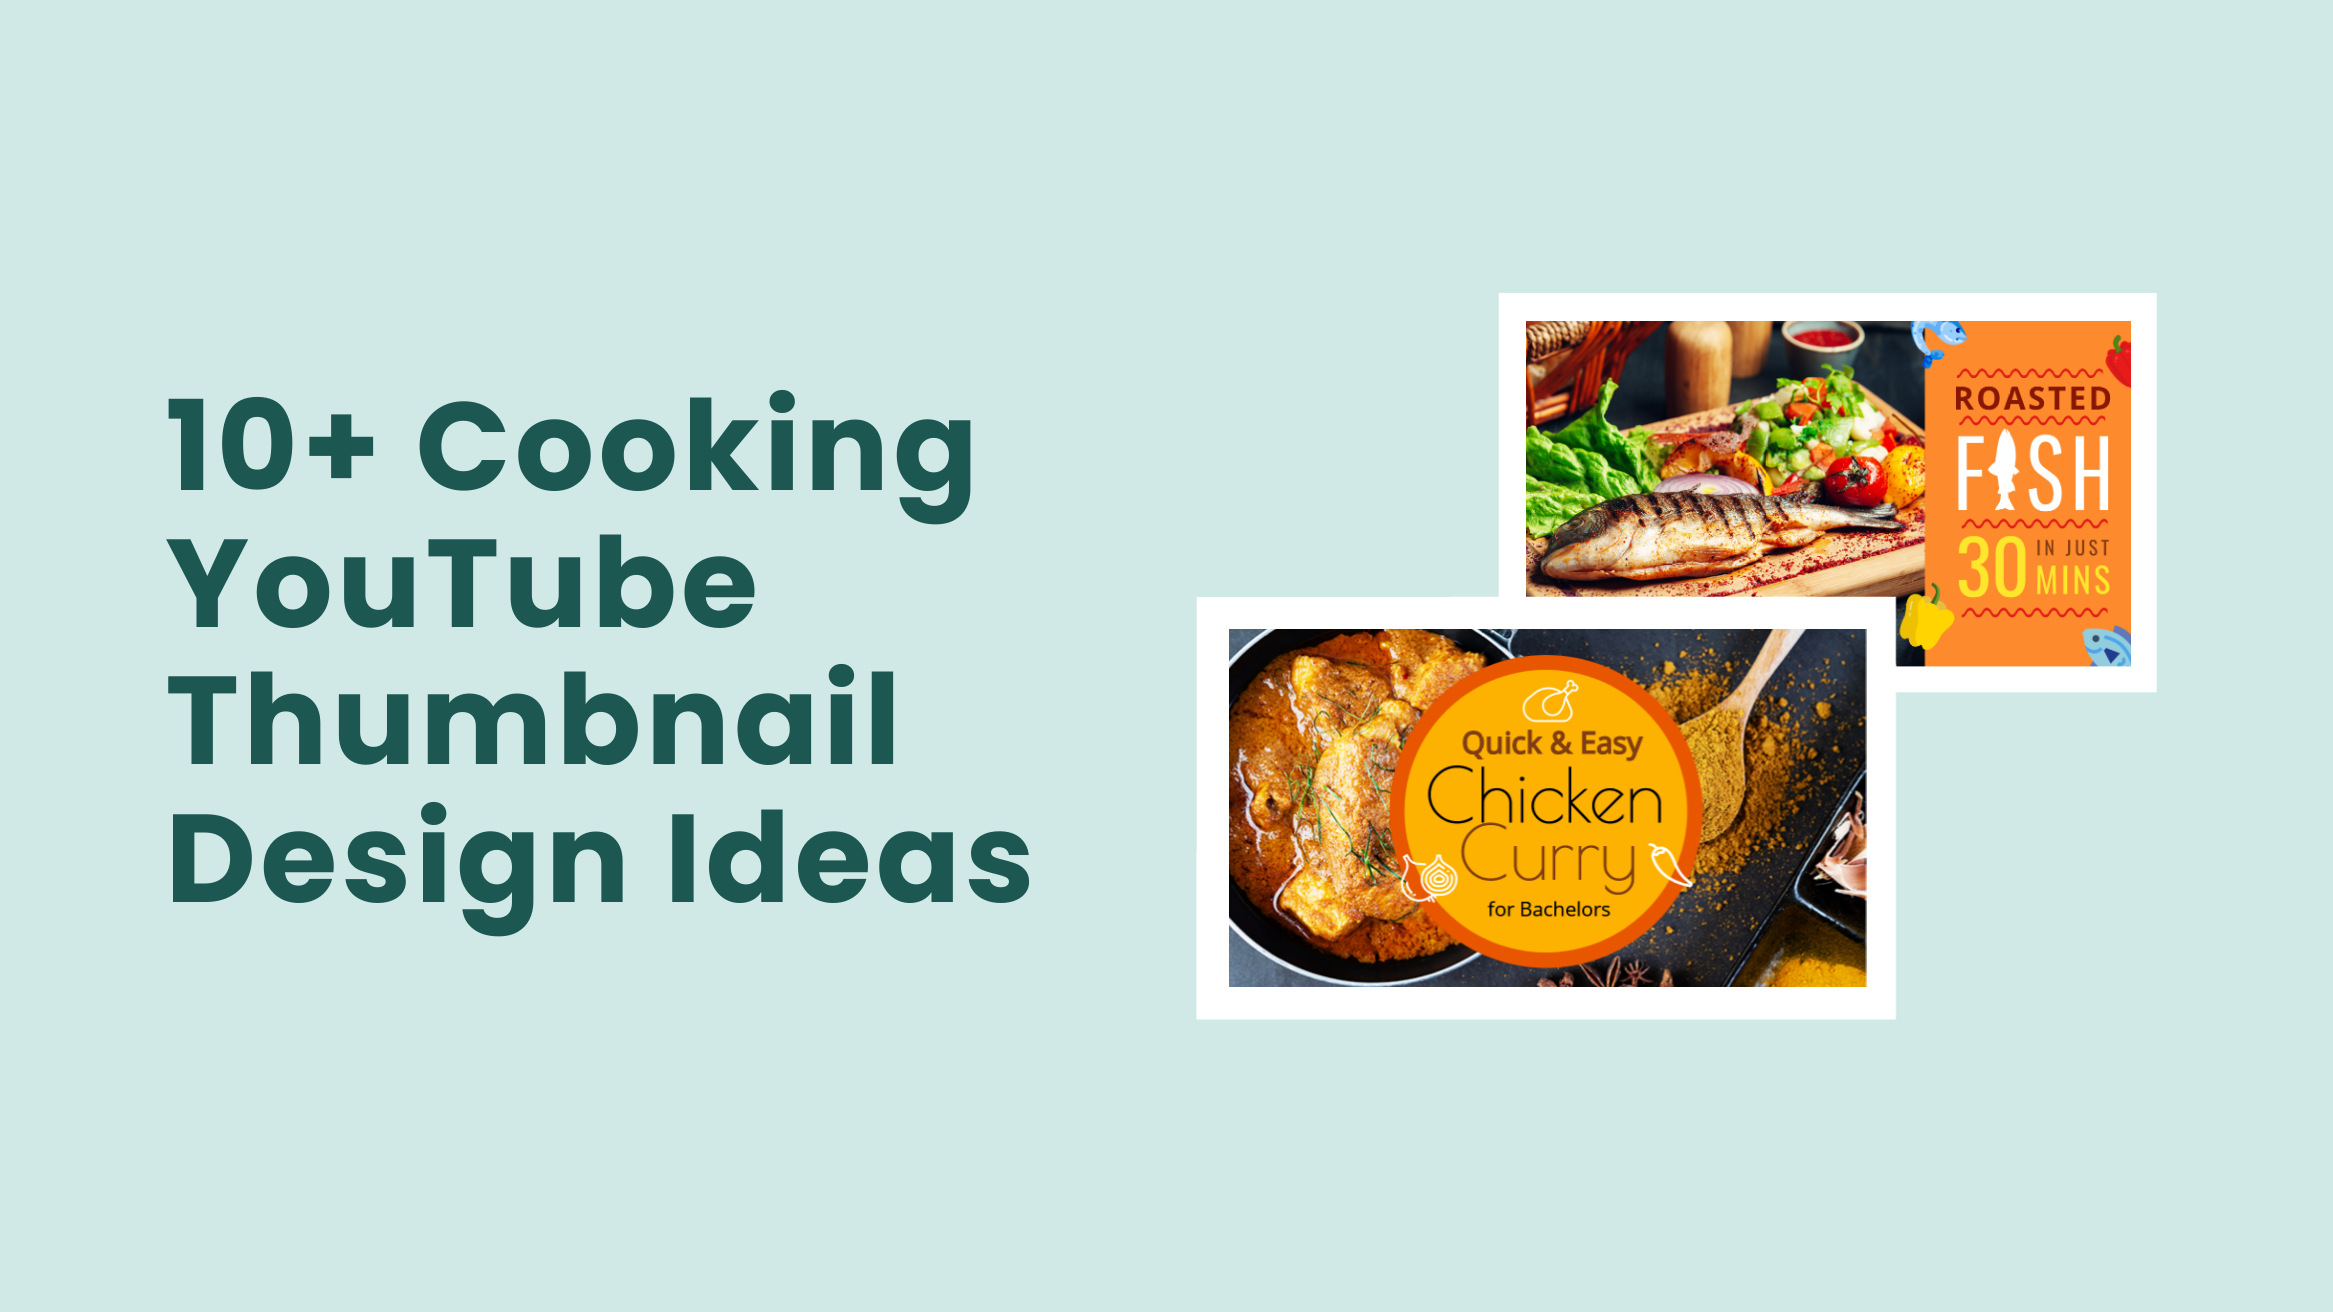 Cooking YouTube Thumbnail Design Ideas to Grow Your Cooking YouTube Channel